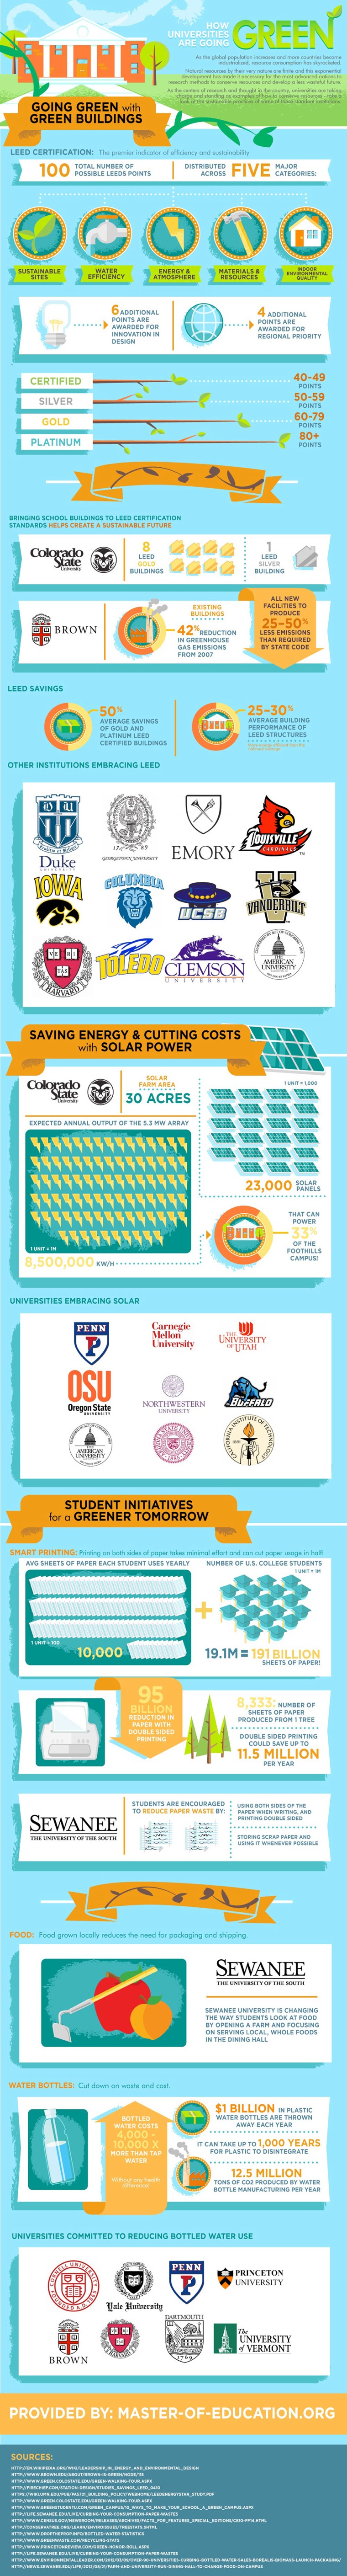 Green Colleges Infographic